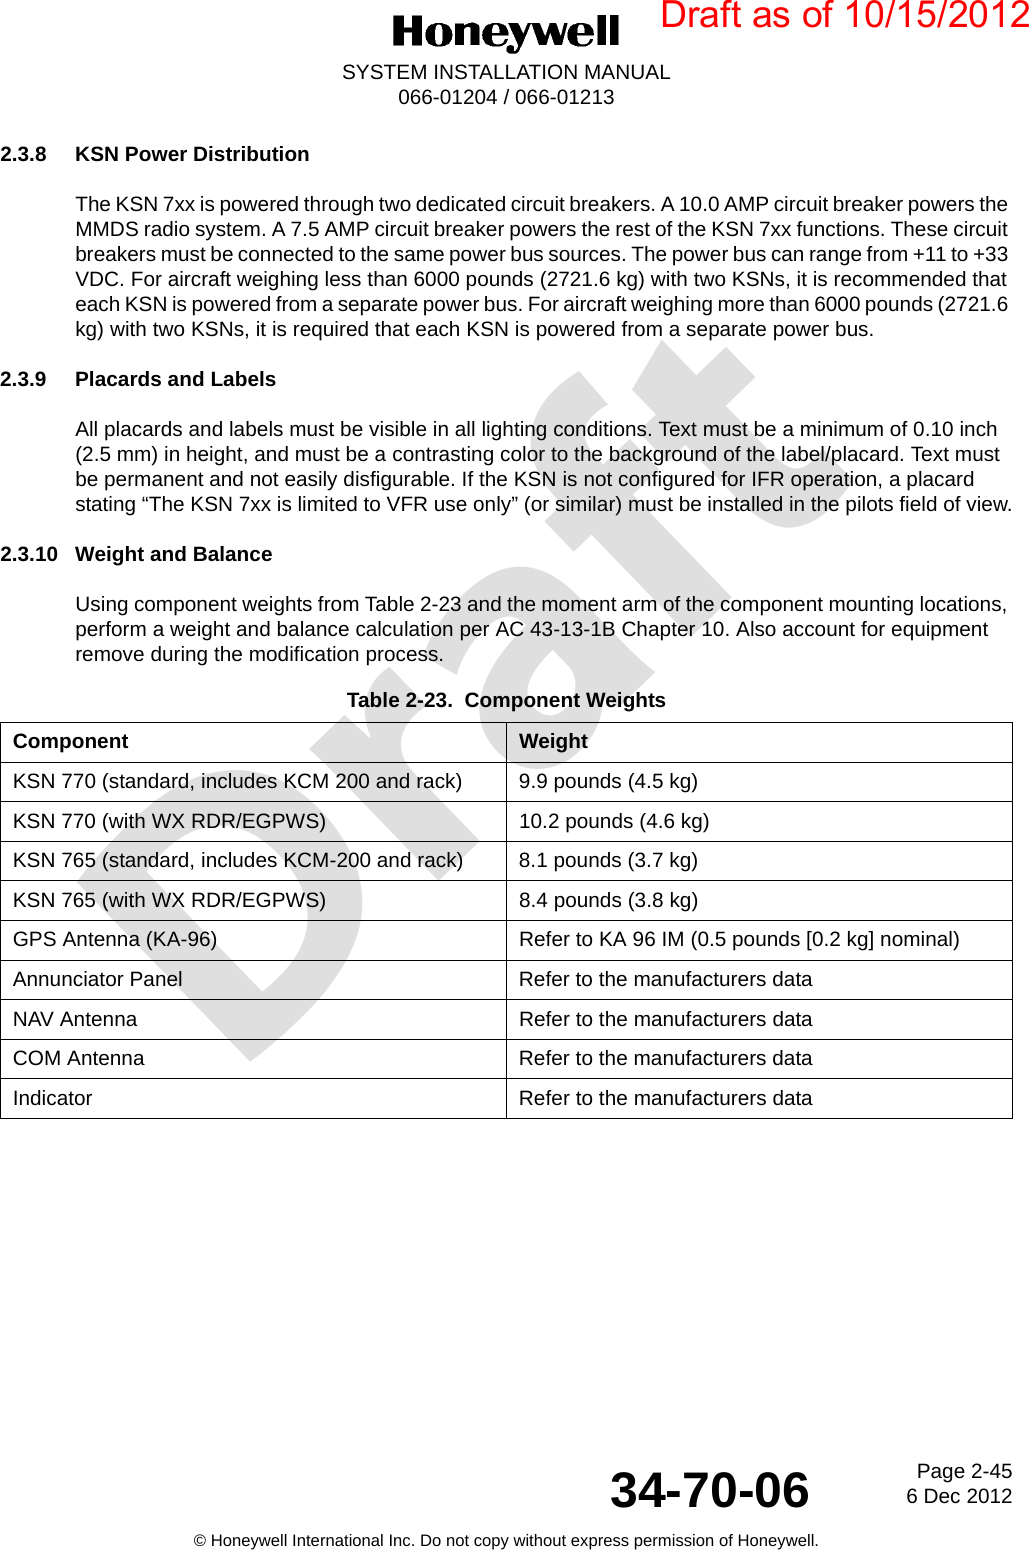 DraftPage 2-456 Dec 201234-70-06SYSTEM INSTALLATION MANUAL066-01204 / 066-01213© Honeywell International Inc. Do not copy without express permission of Honeywell.2.3.8 KSN Power DistributionThe KSN 7xx is powered through two dedicated circuit breakers. A 10.0 AMP circuit breaker powers the MMDS radio system. A 7.5 AMP circuit breaker powers the rest of the KSN 7xx functions. These circuit breakers must be connected to the same power bus sources. The power bus can range from +11 to +33 VDC. For aircraft weighing less than 6000 pounds (2721.6 kg) with two KSNs, it is recommended that each KSN is powered from a separate power bus. For aircraft weighing more than 6000 pounds (2721.6 kg) with two KSNs, it is required that each KSN is powered from a separate power bus.2.3.9 Placards and LabelsAll placards and labels must be visible in all lighting conditions. Text must be a minimum of 0.10 inch (2.5 mm) in height, and must be a contrasting color to the background of the label/placard. Text must be permanent and not easily disfigurable. If the KSN is not configured for IFR operation, a placard stating “The KSN 7xx is limited to VFR use only” (or similar) must be installed in the pilots field of view.2.3.10 Weight and BalanceUsing component weights from Table 2-23 and the moment arm of the component mounting locations, perform a weight and balance calculation per AC 43-13-1B Chapter 10. Also account for equipment remove during the modification process.Table 2-23.  Component WeightsComponent WeightKSN 770 (standard, includes KCM 200 and rack) 9.9 pounds (4.5 kg)KSN 770 (with WX RDR/EGPWS) 10.2 pounds (4.6 kg)KSN 765 (standard, includes KCM-200 and rack) 8.1 pounds (3.7 kg)KSN 765 (with WX RDR/EGPWS) 8.4 pounds (3.8 kg)GPS Antenna (KA-96) Refer to KA 96 IM (0.5 pounds [0.2 kg] nominal)Annunciator Panel Refer to the manufacturers dataNAV Antenna Refer to the manufacturers dataCOM Antenna Refer to the manufacturers dataIndicator Refer to the manufacturers dataDraft as of 10/15/2012